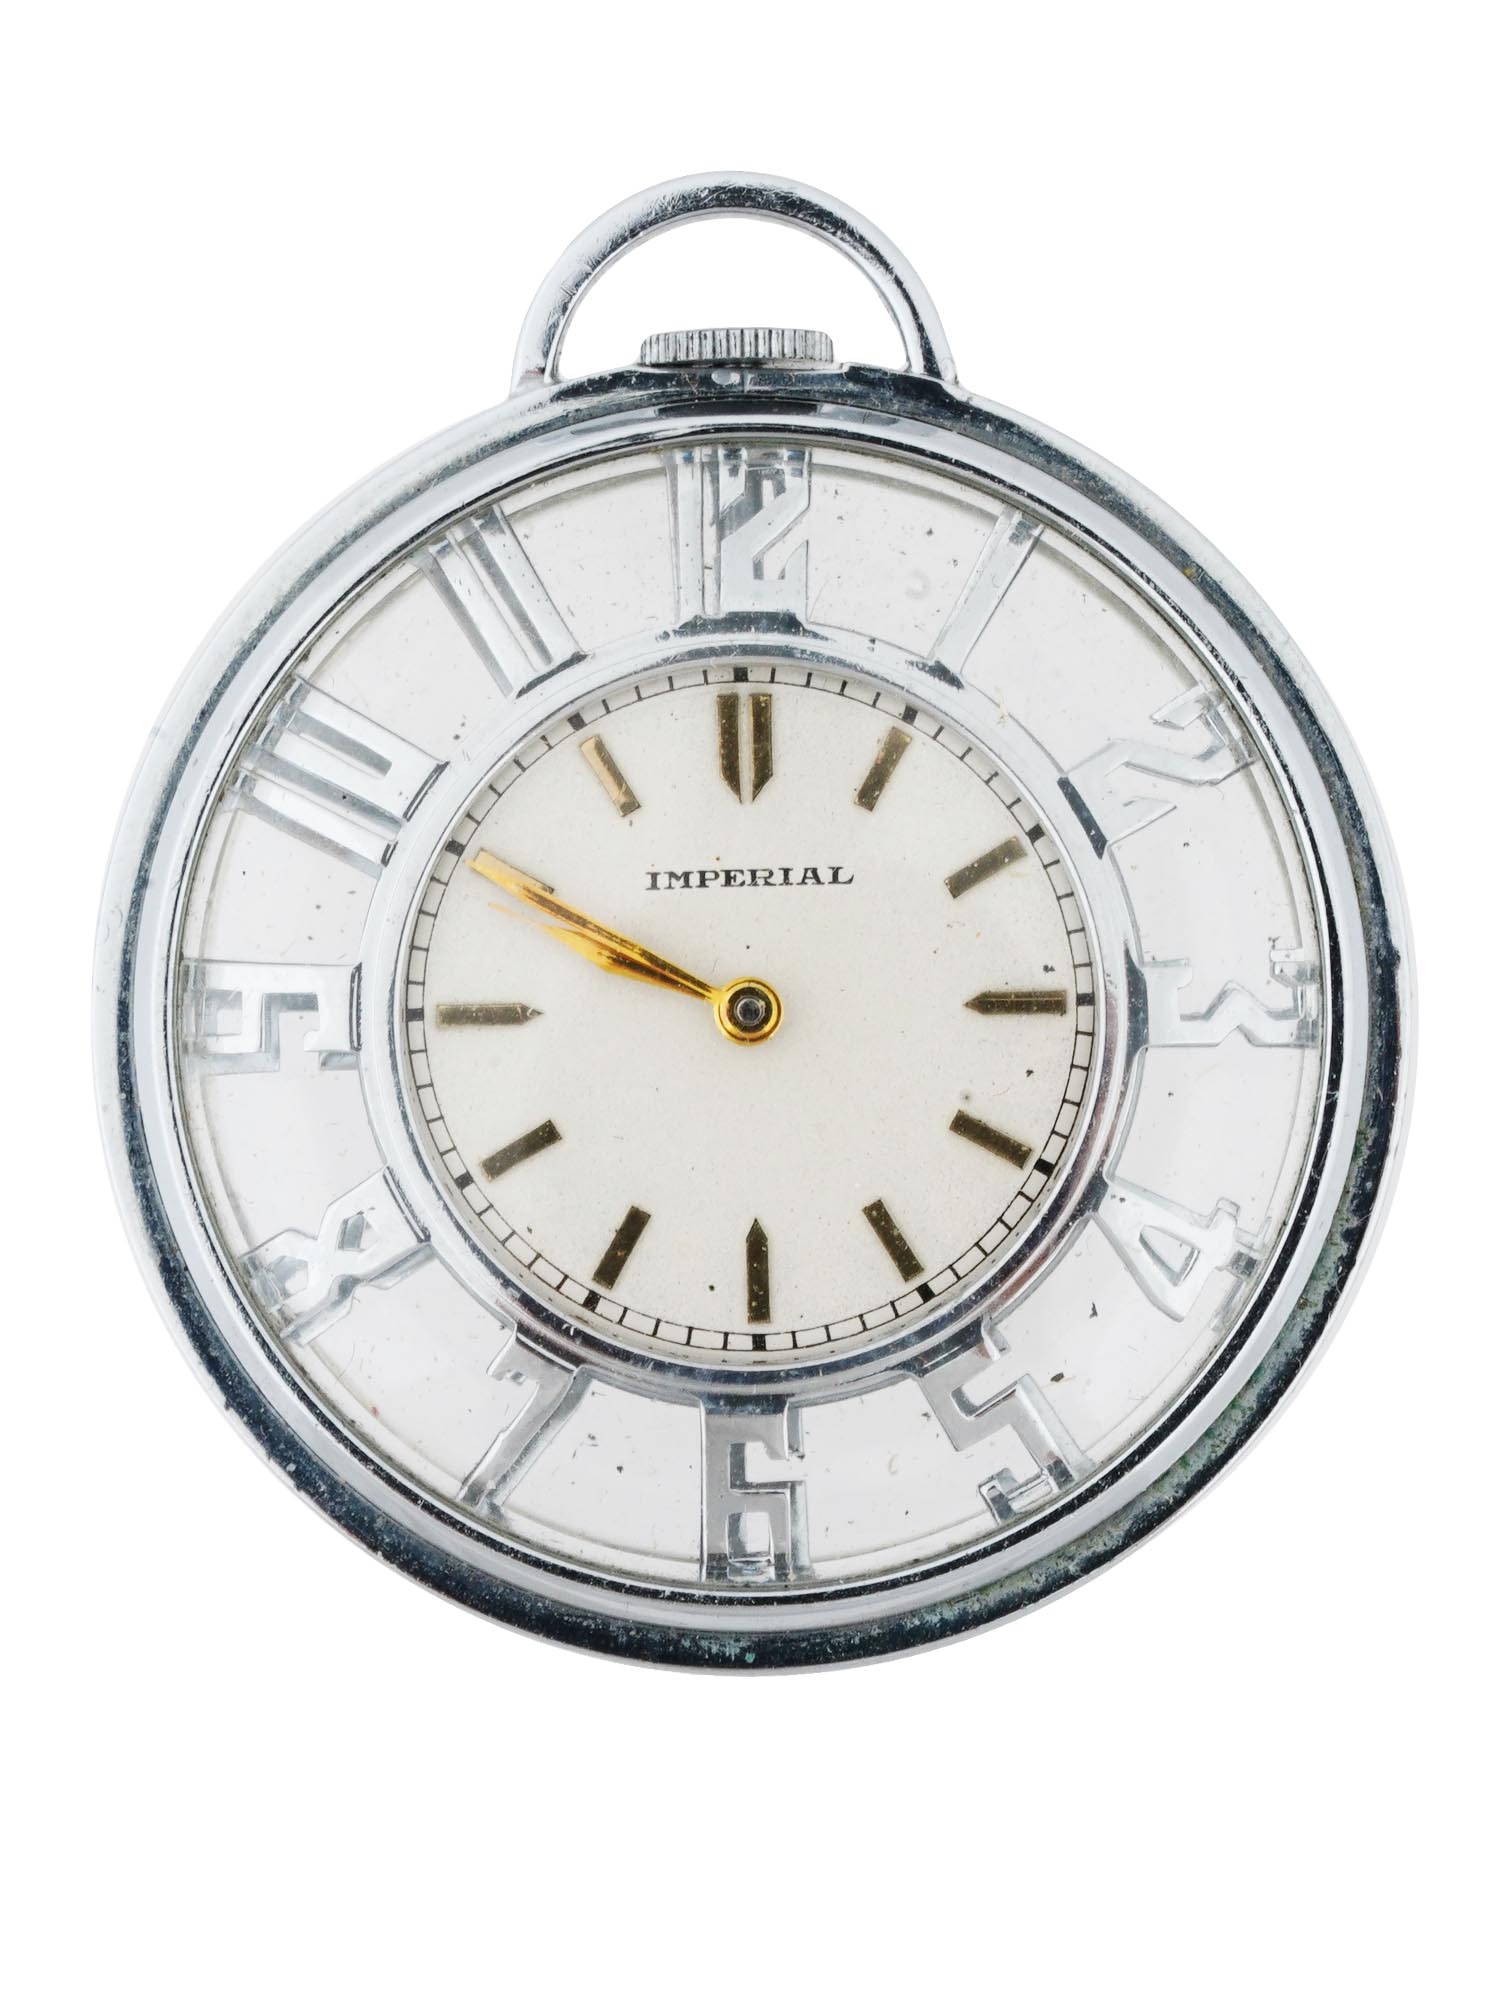 IMPERIAL SWISS 17 JEWELS OPEN FACE POCKET WATCH PIC-0